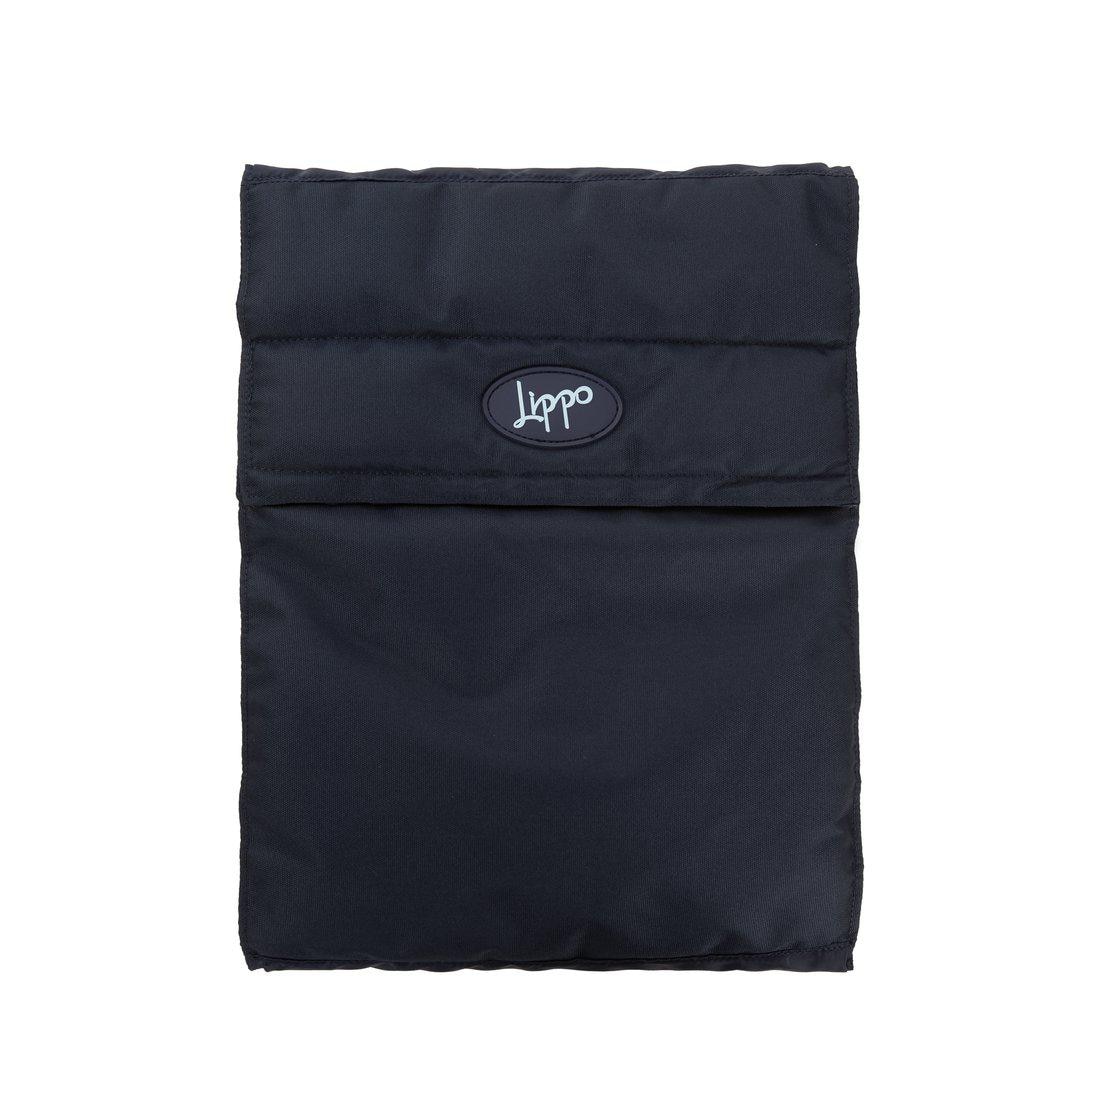 Lippo Chest Protection - Navy